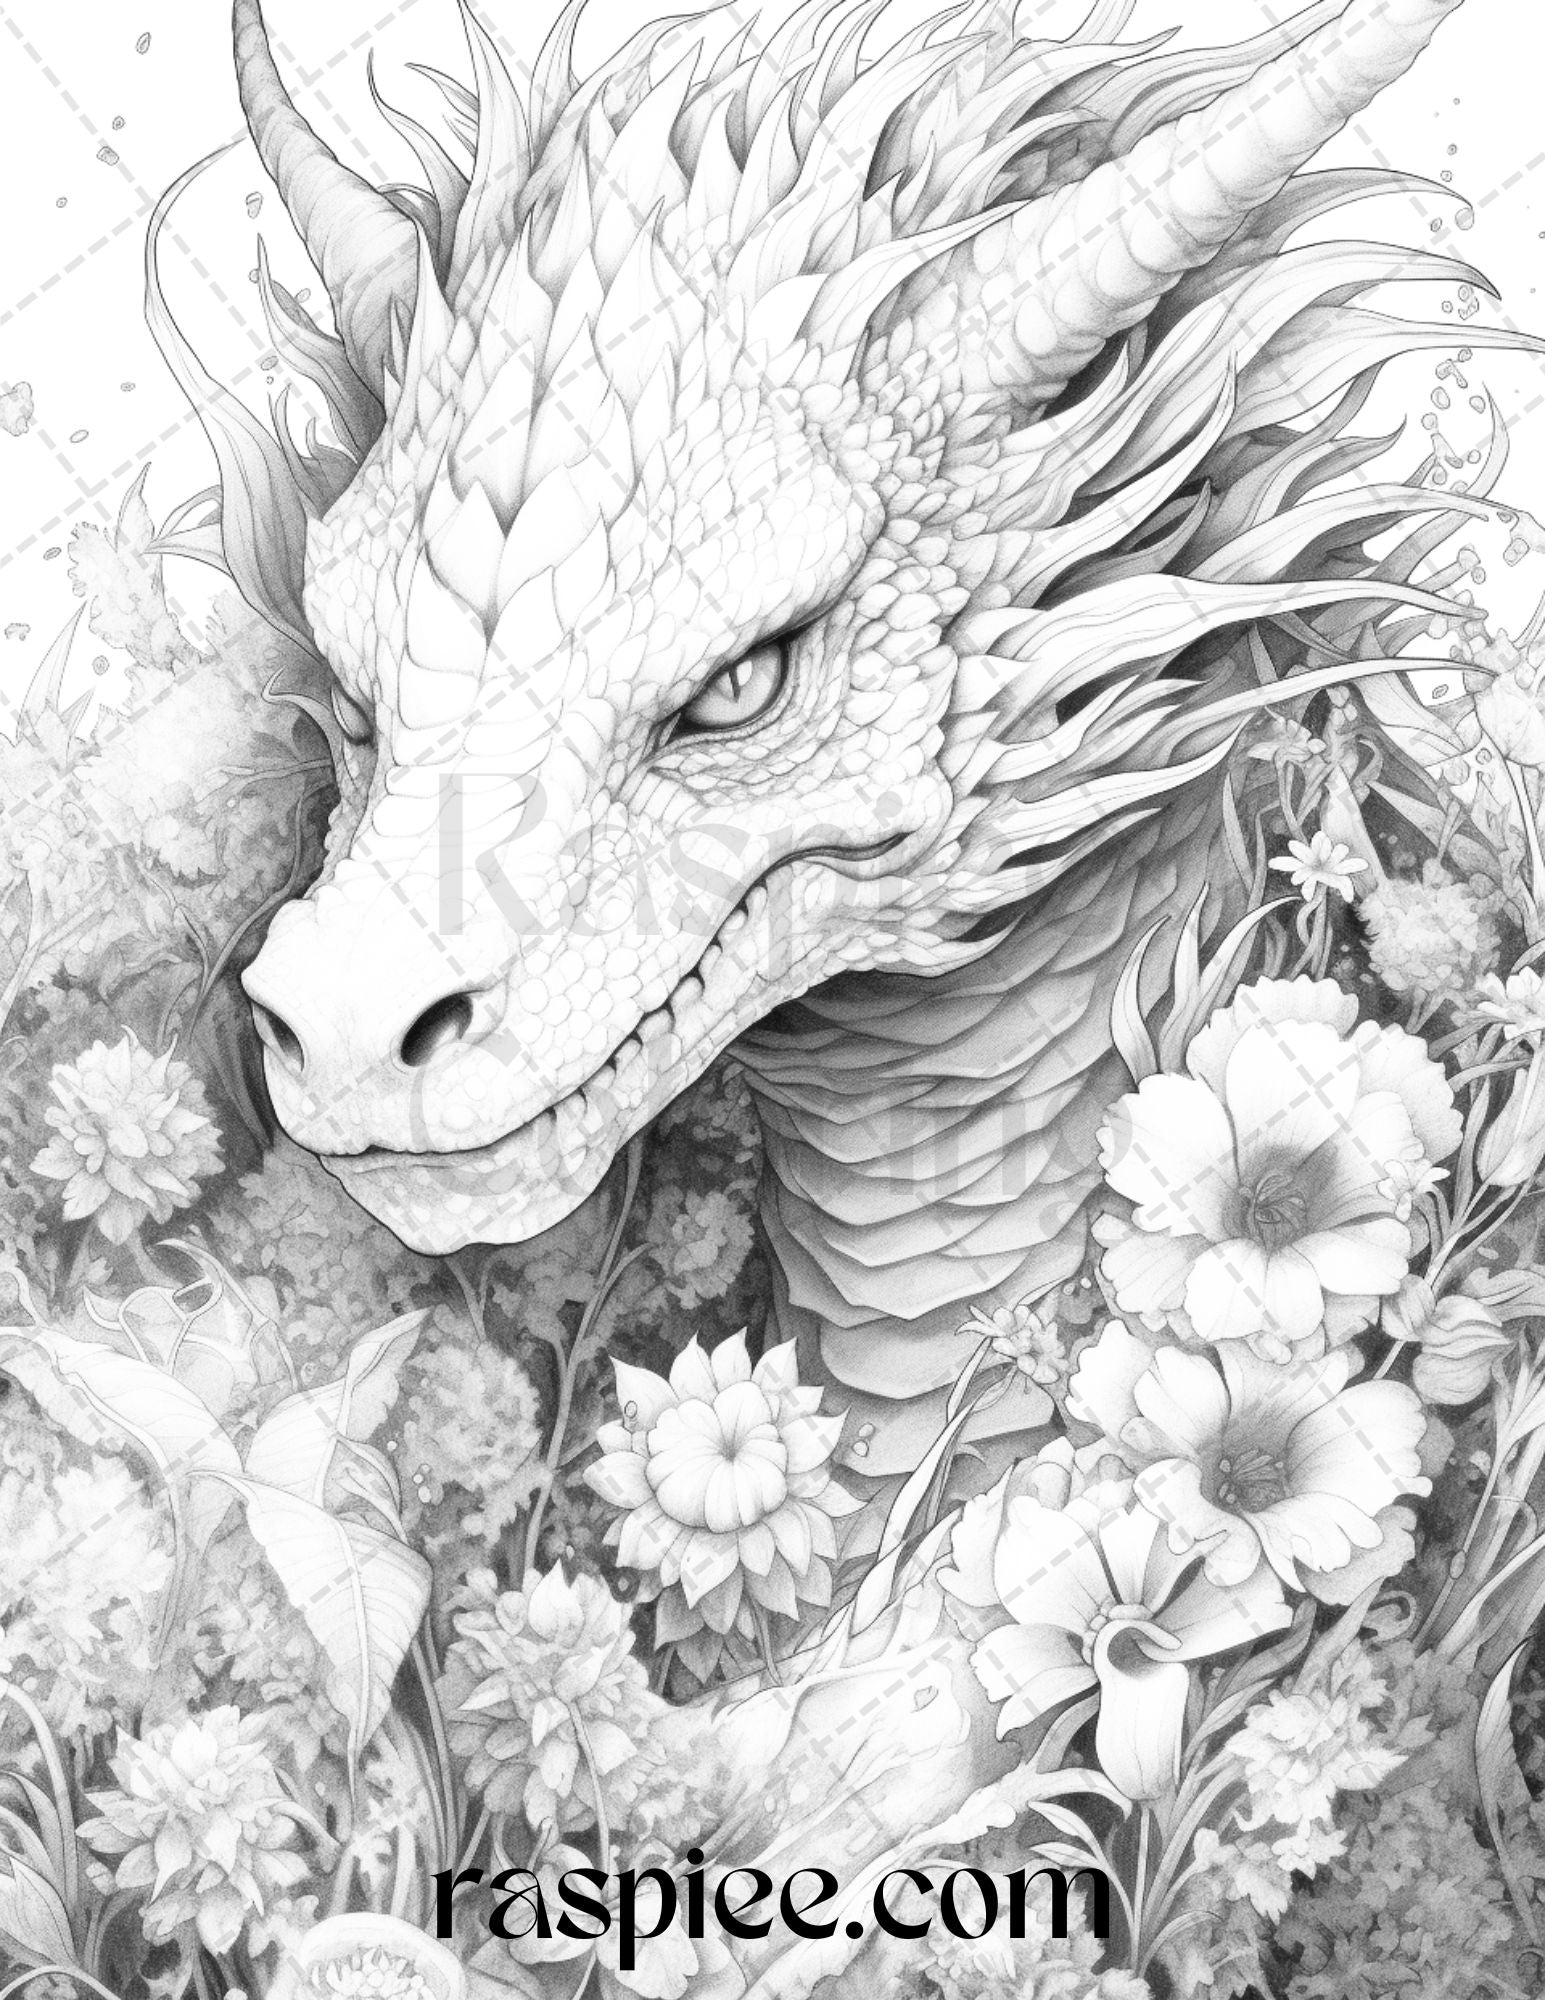 40 Flower Dragon Grayscale Coloring Pages Printable for Adults, PDF File Instant Download - raspiee